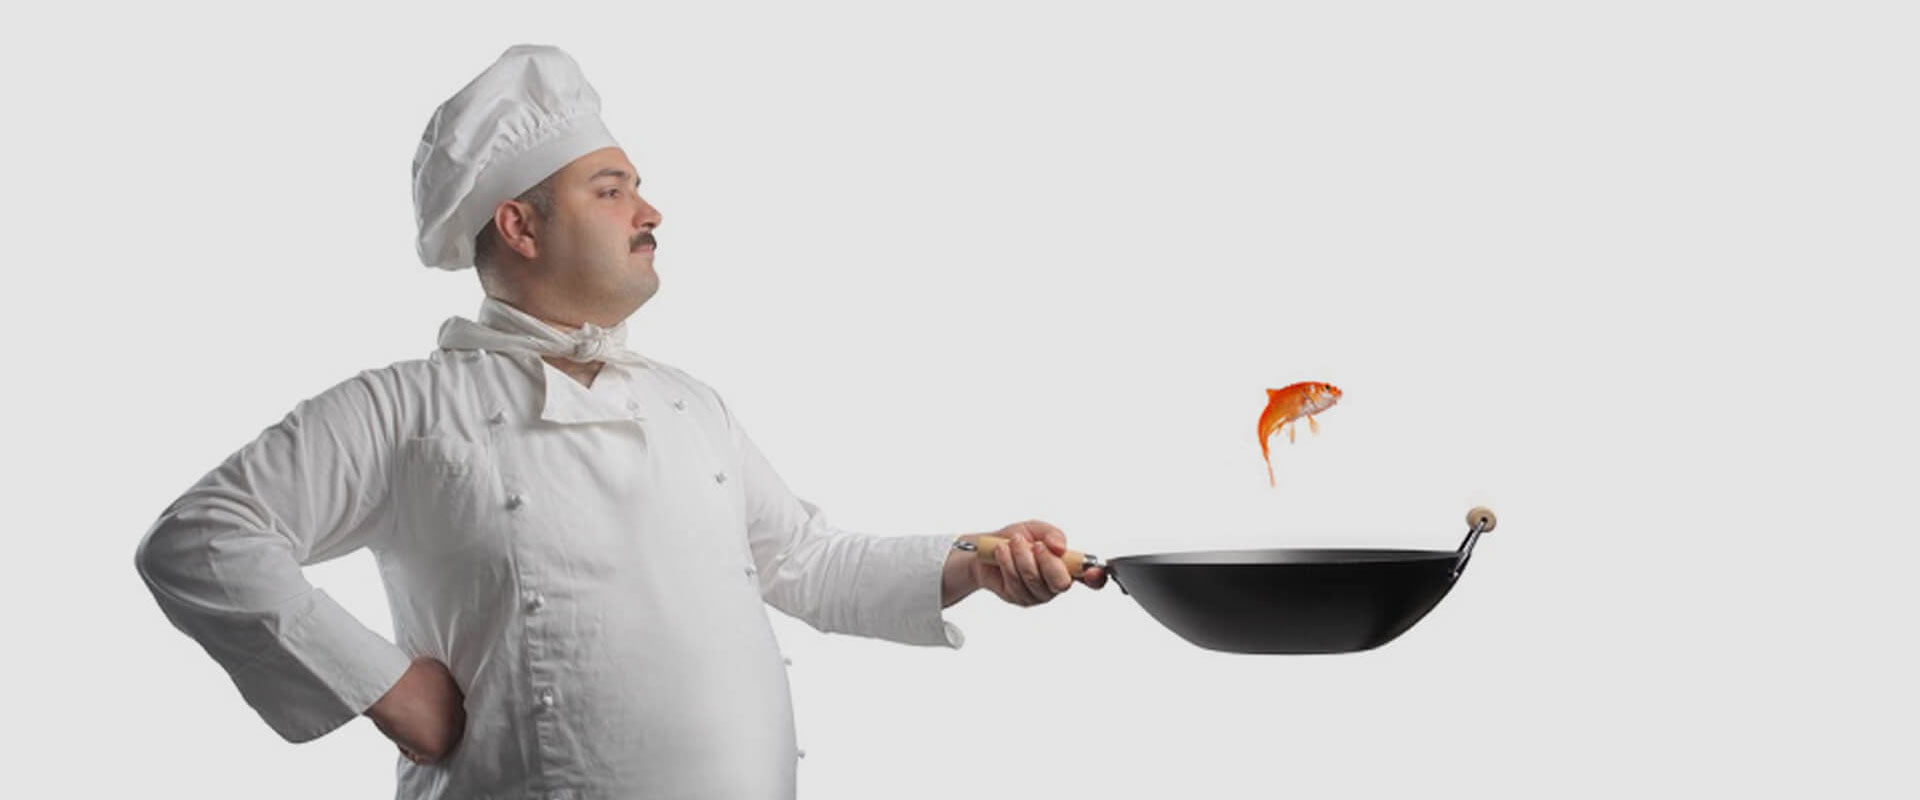 Why Considering Outsourcing as You Have Bigger Fish to Fry